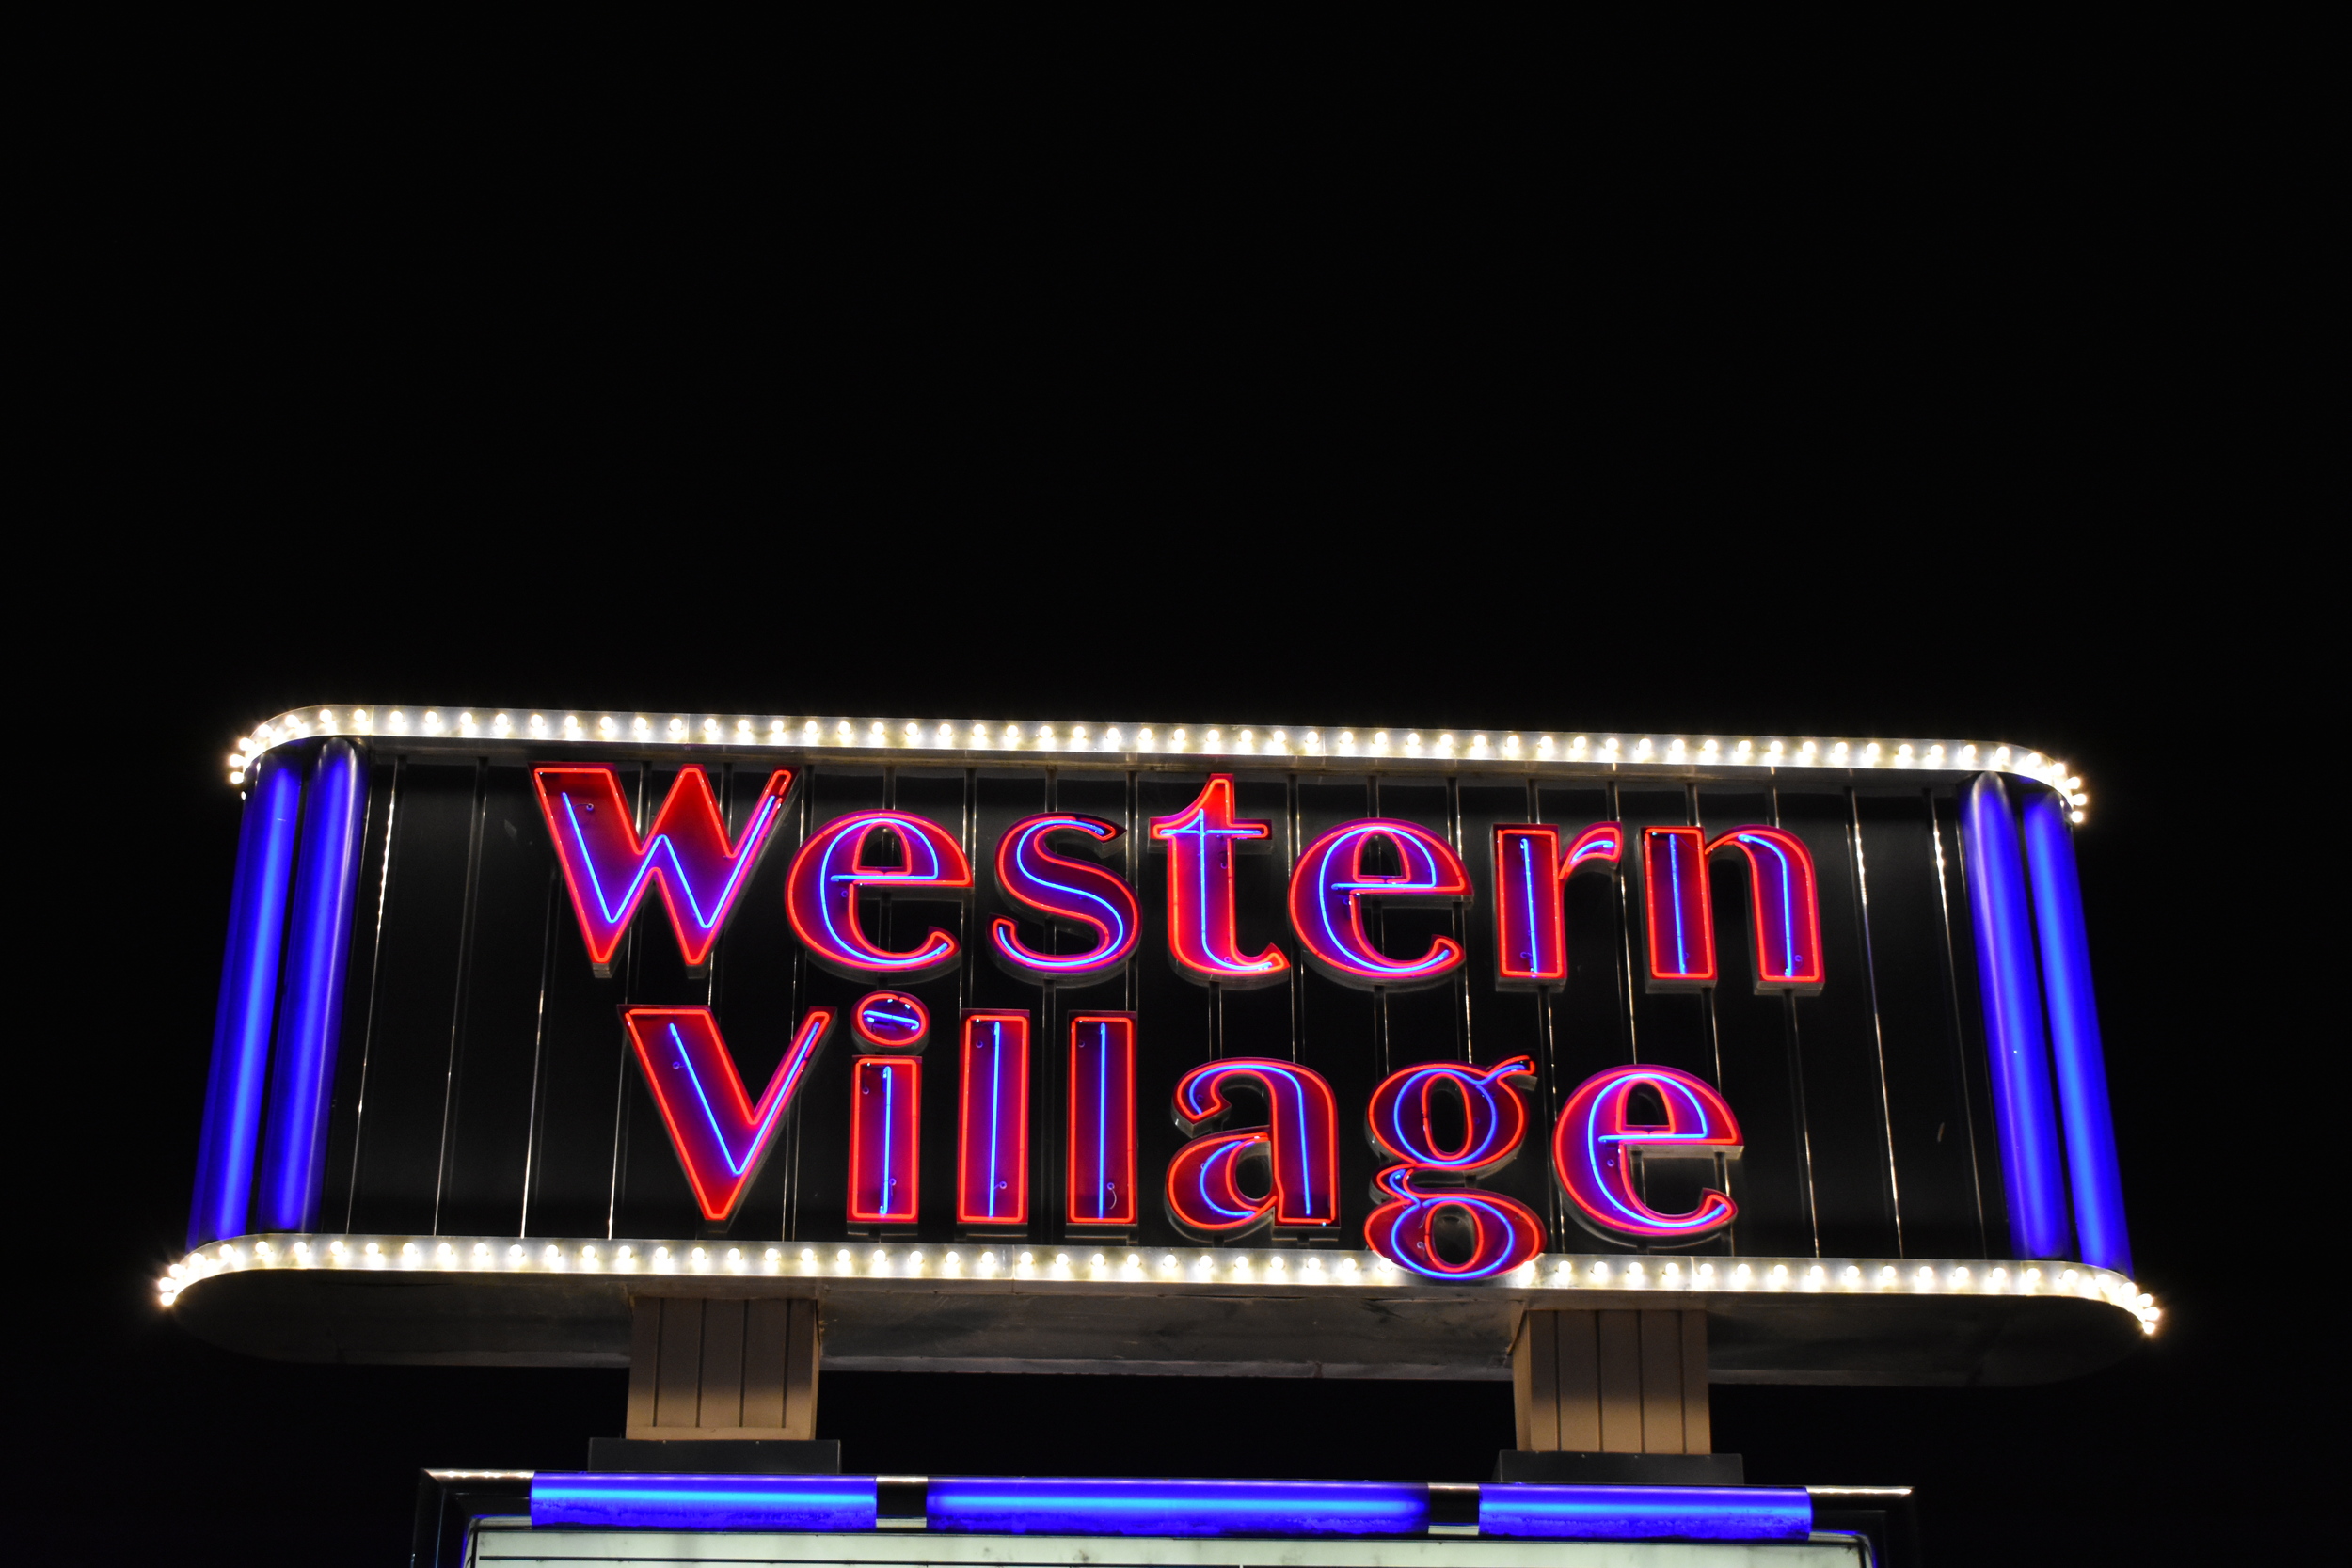 Western Village Inn & Casino double mounted sign, Sparks, Nevada